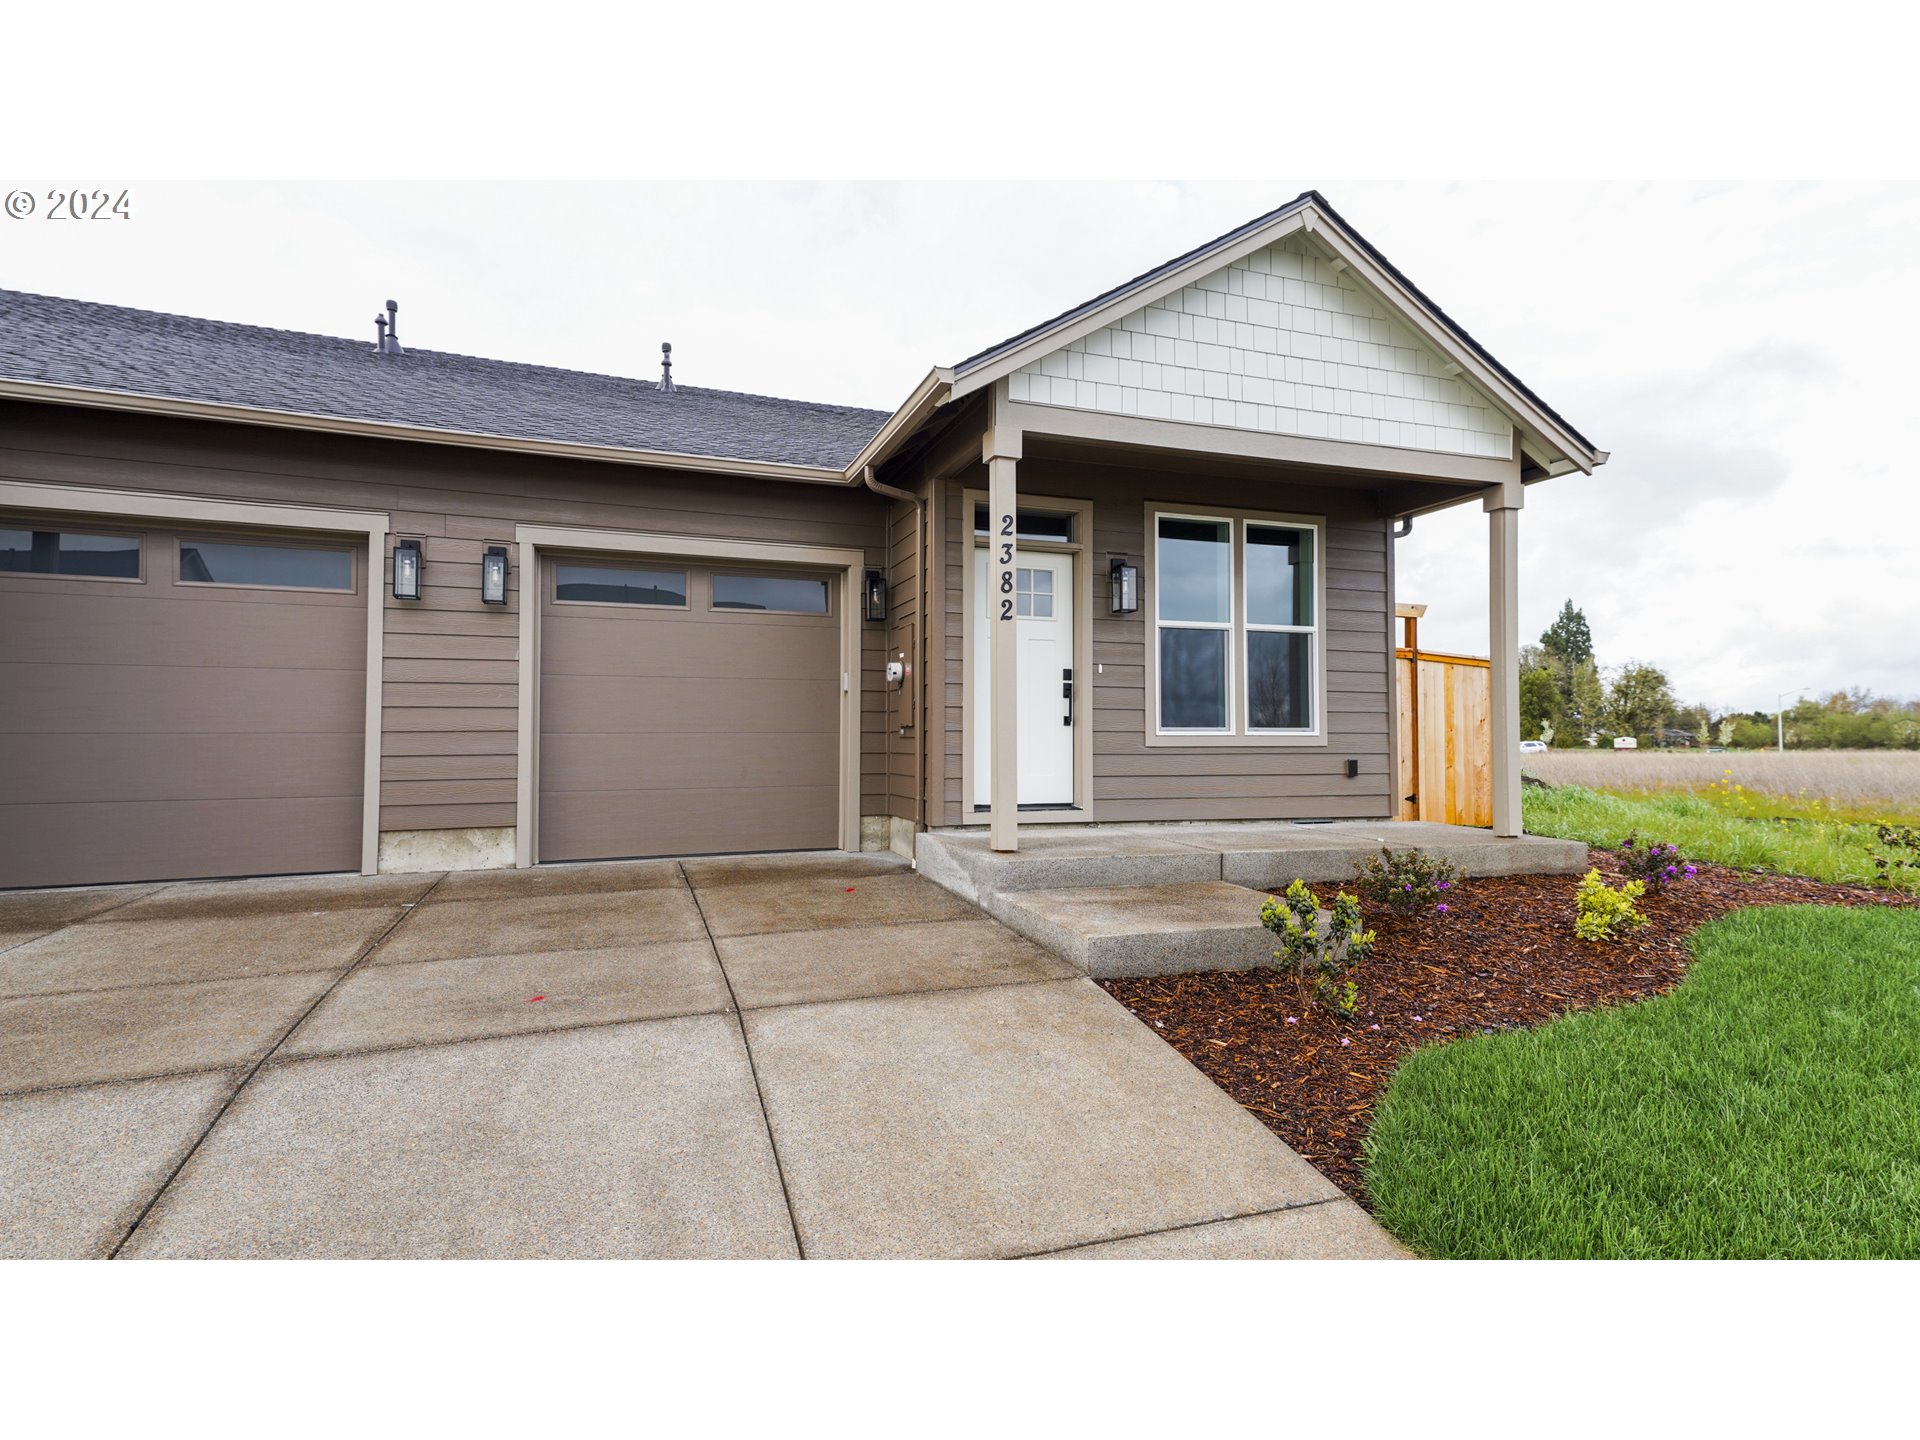 2382 W 9th AVE, Junction City, OR 